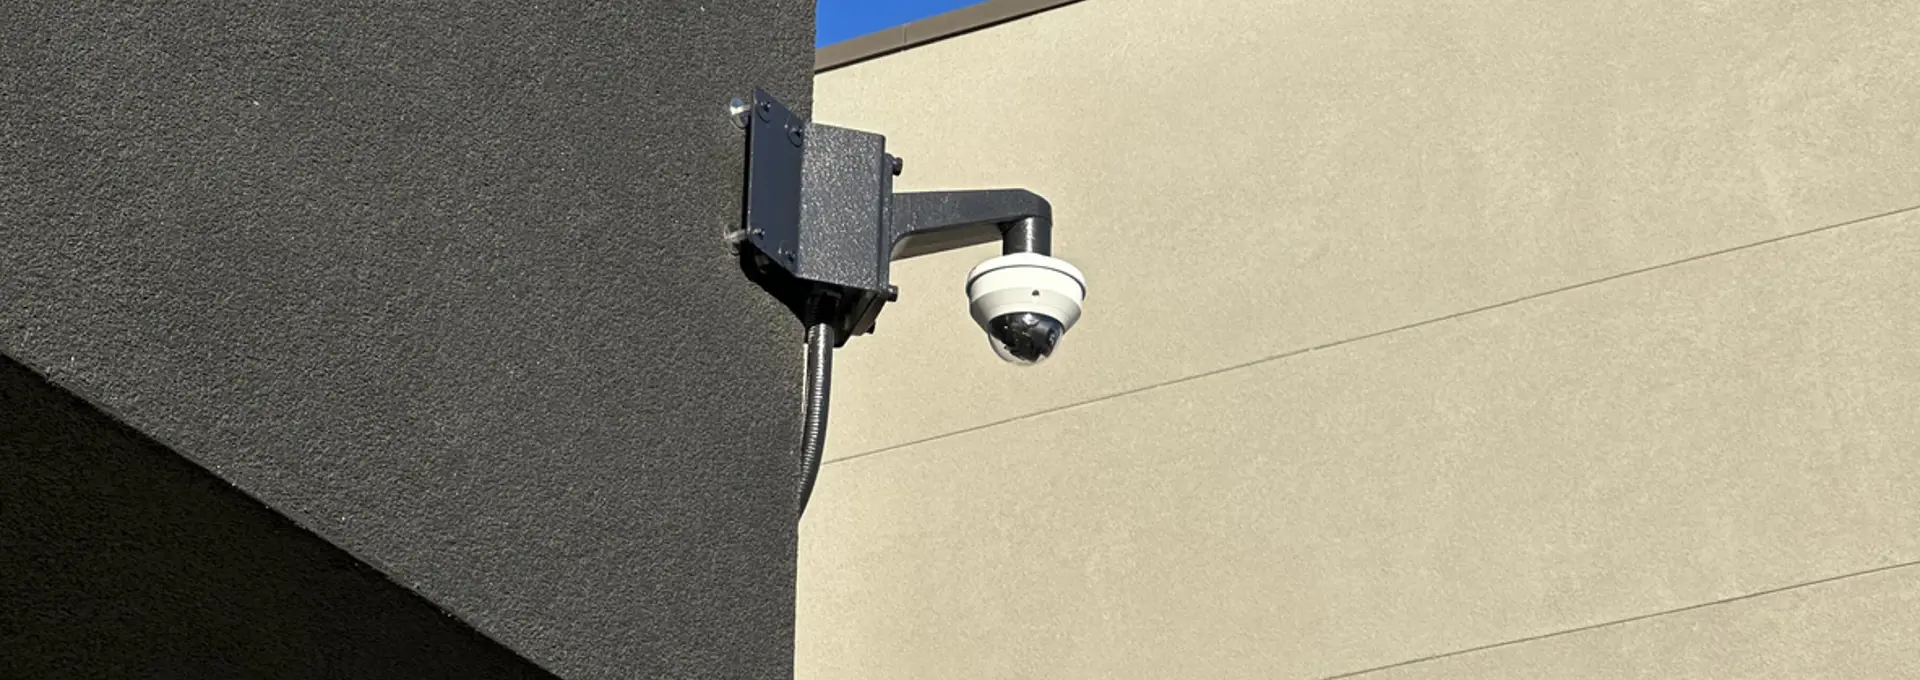 CCTV Camera On Side Of Building Stock